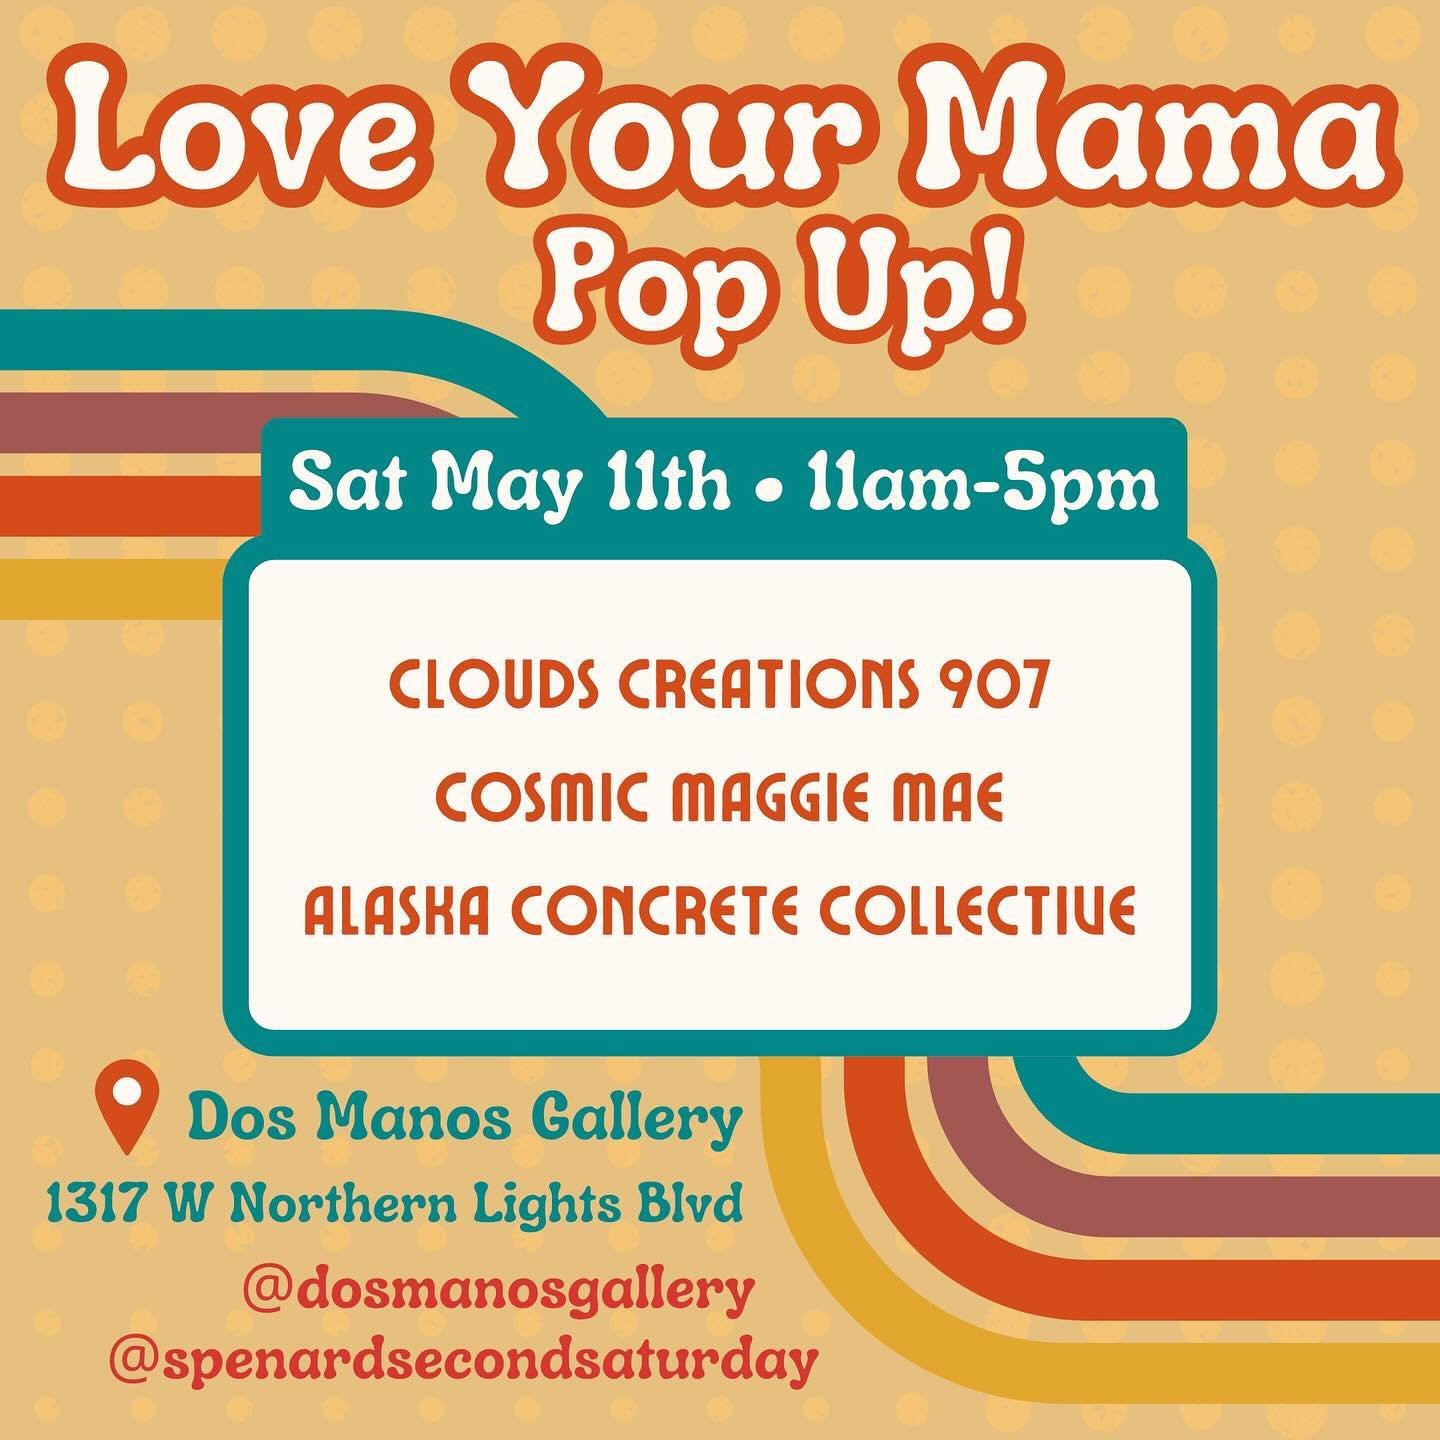 It&rsquo;s a special @spenardsecondsaturday For the ones who give you support that only a mother can give, we are hosting the Love Your Mama Pop-Up. Bring your mama, bring your friends, shop with the kids in tow. 

@cloudscreations907 is KaiganiHaida